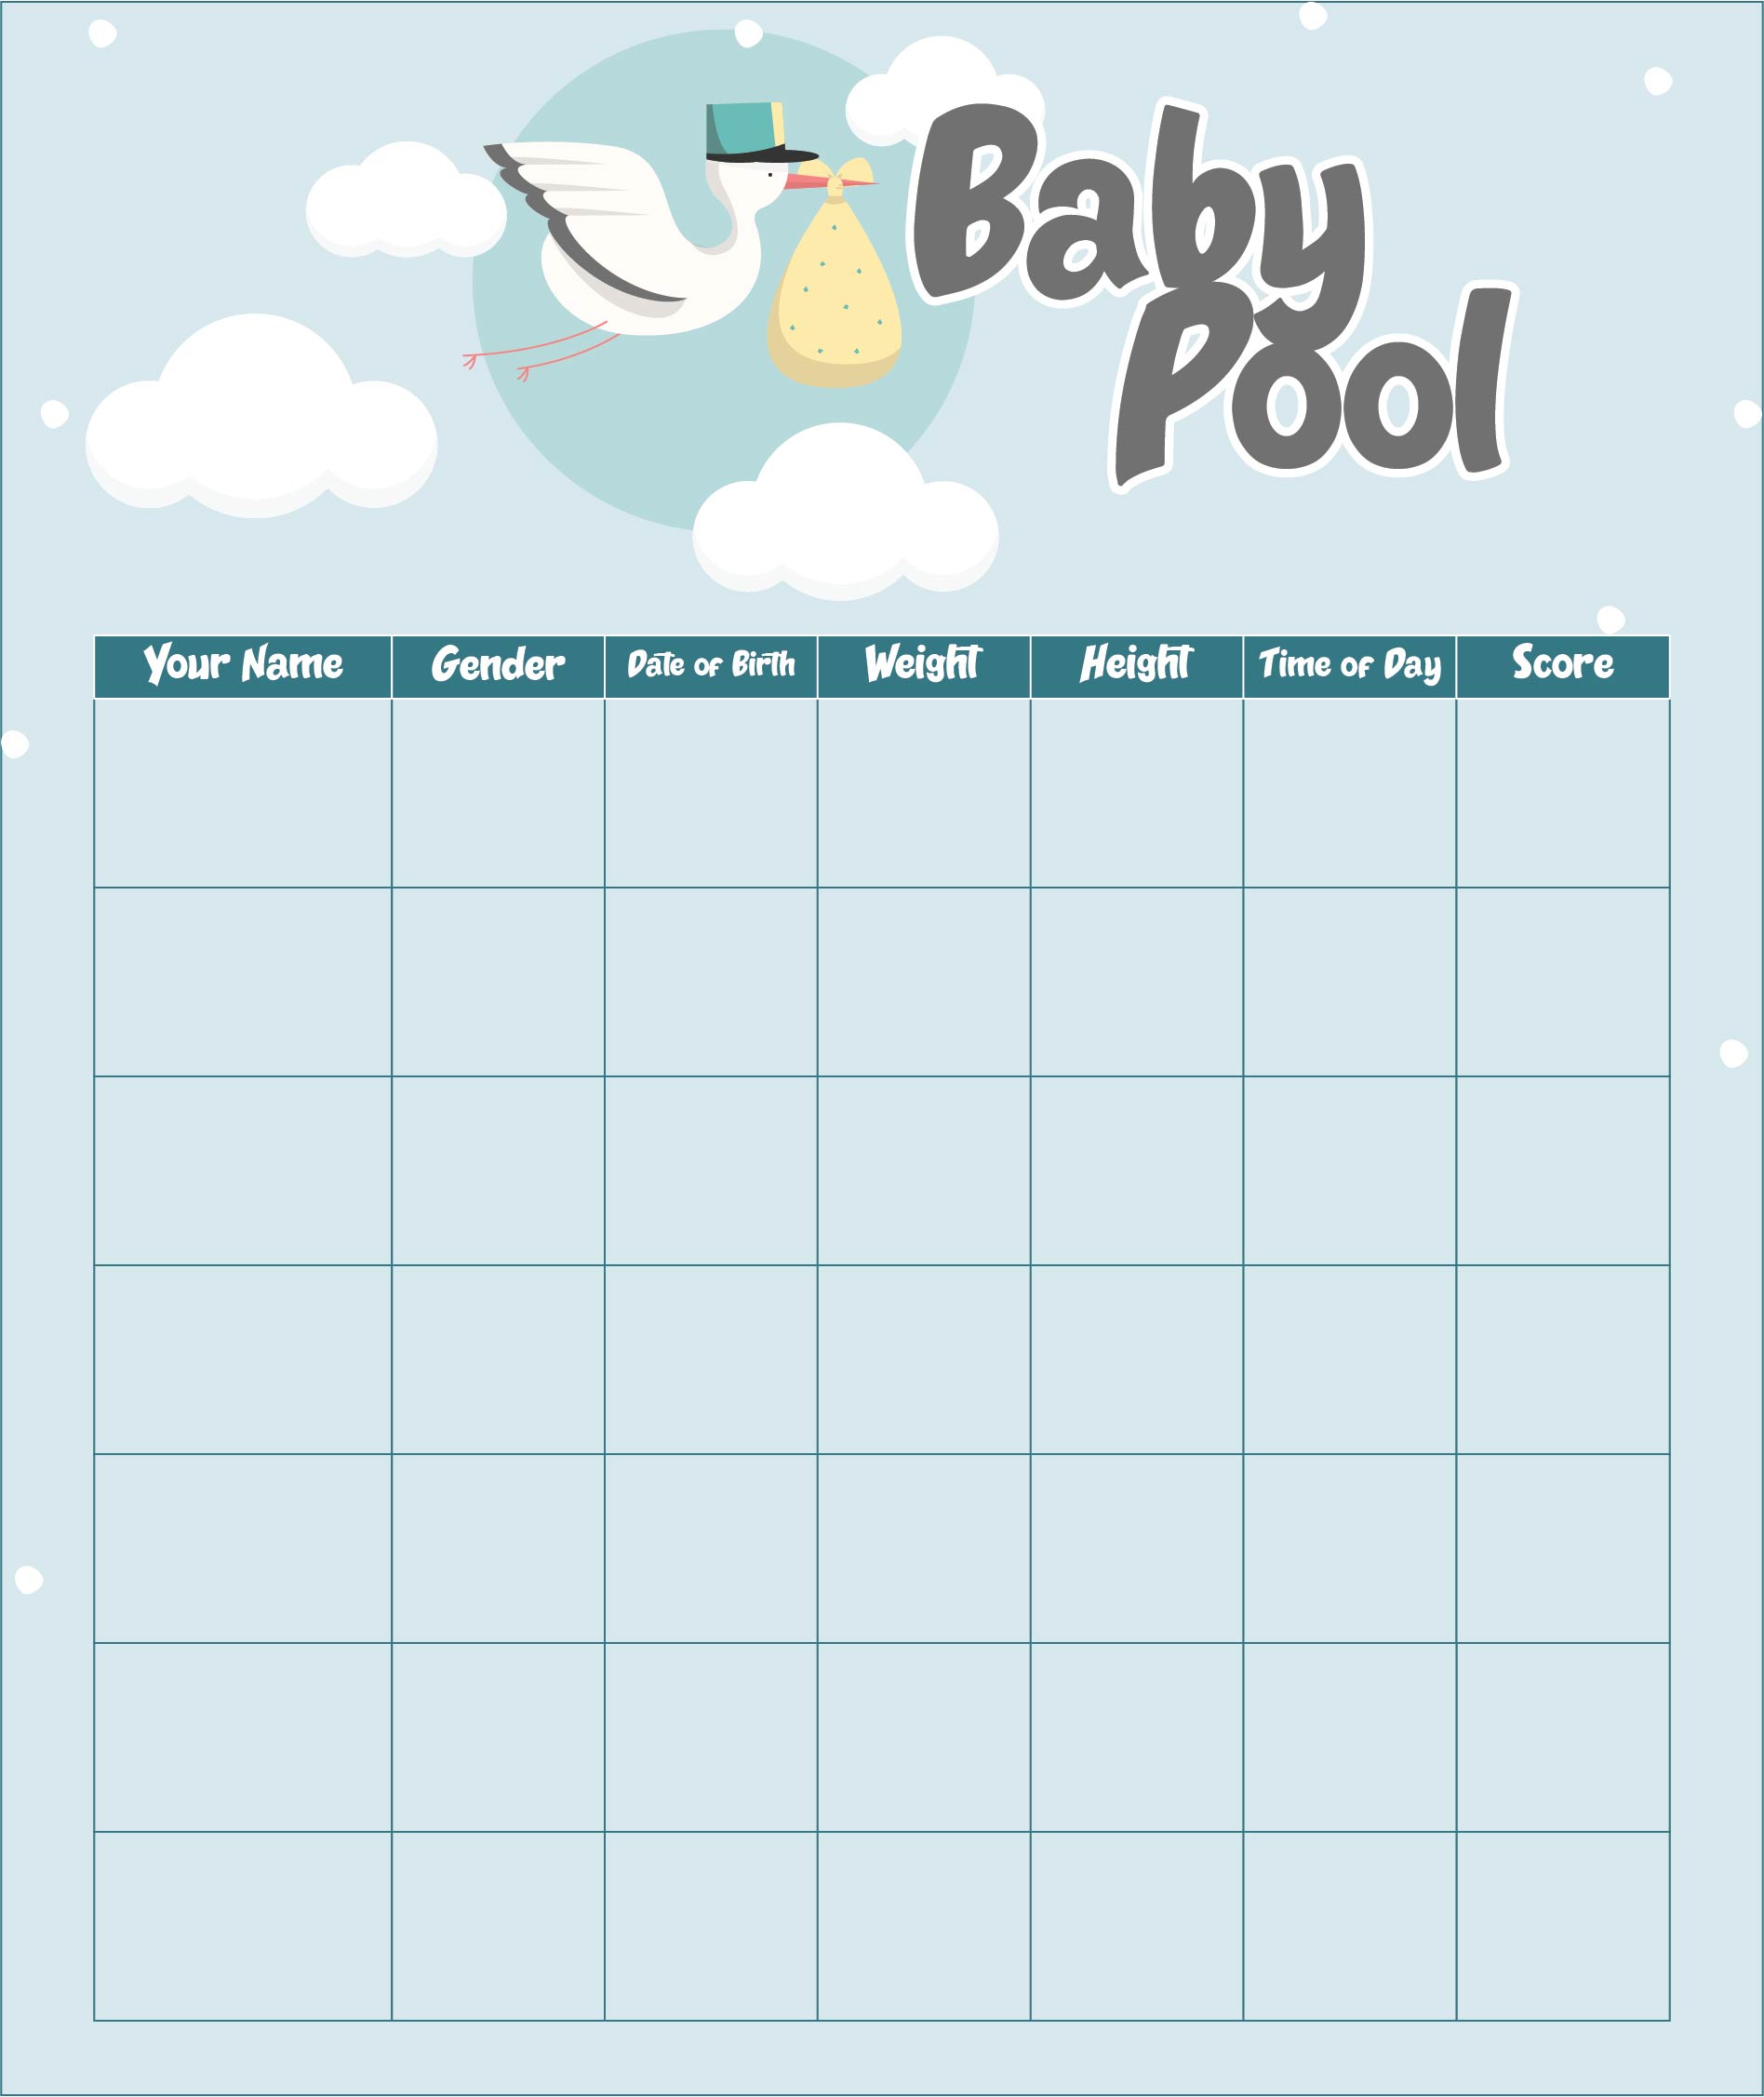 guess the date baby pool for baby shower 27